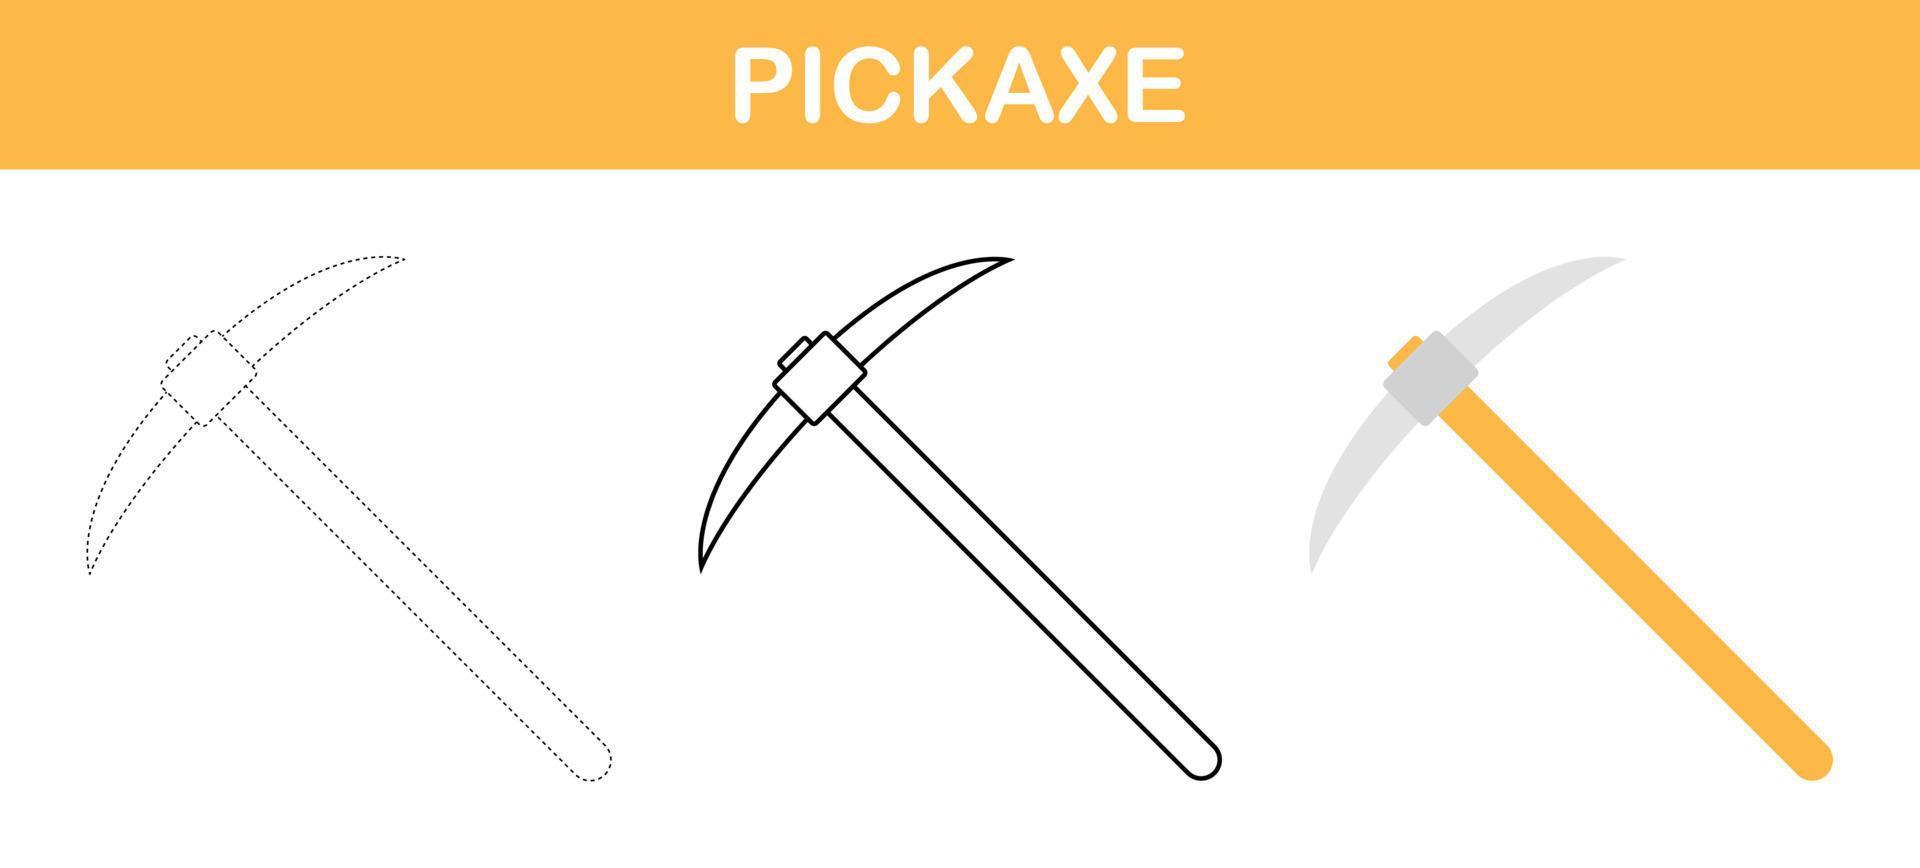 Pickaxe tracing and coloring worksheet for kids vector